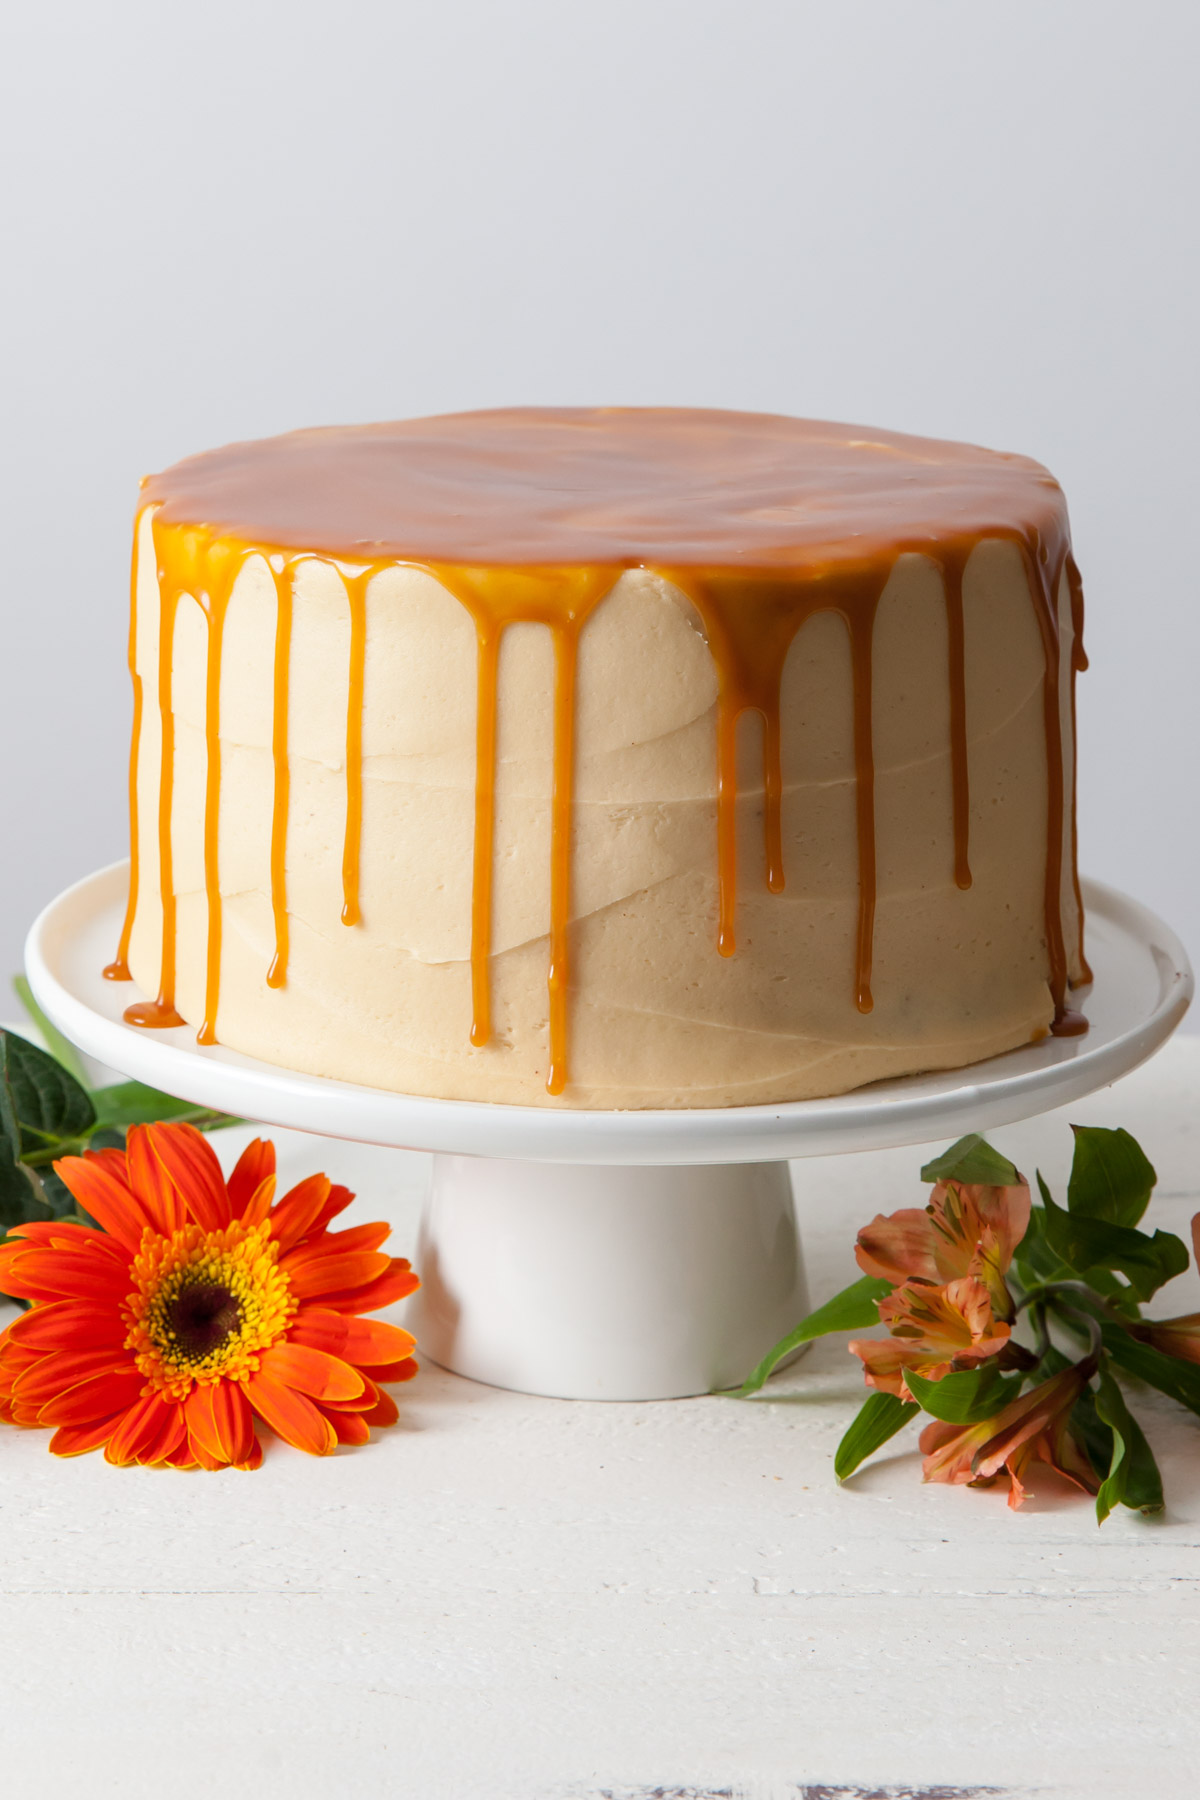 A chocolate layer cake with caramel frosting and a caramel drip on top.